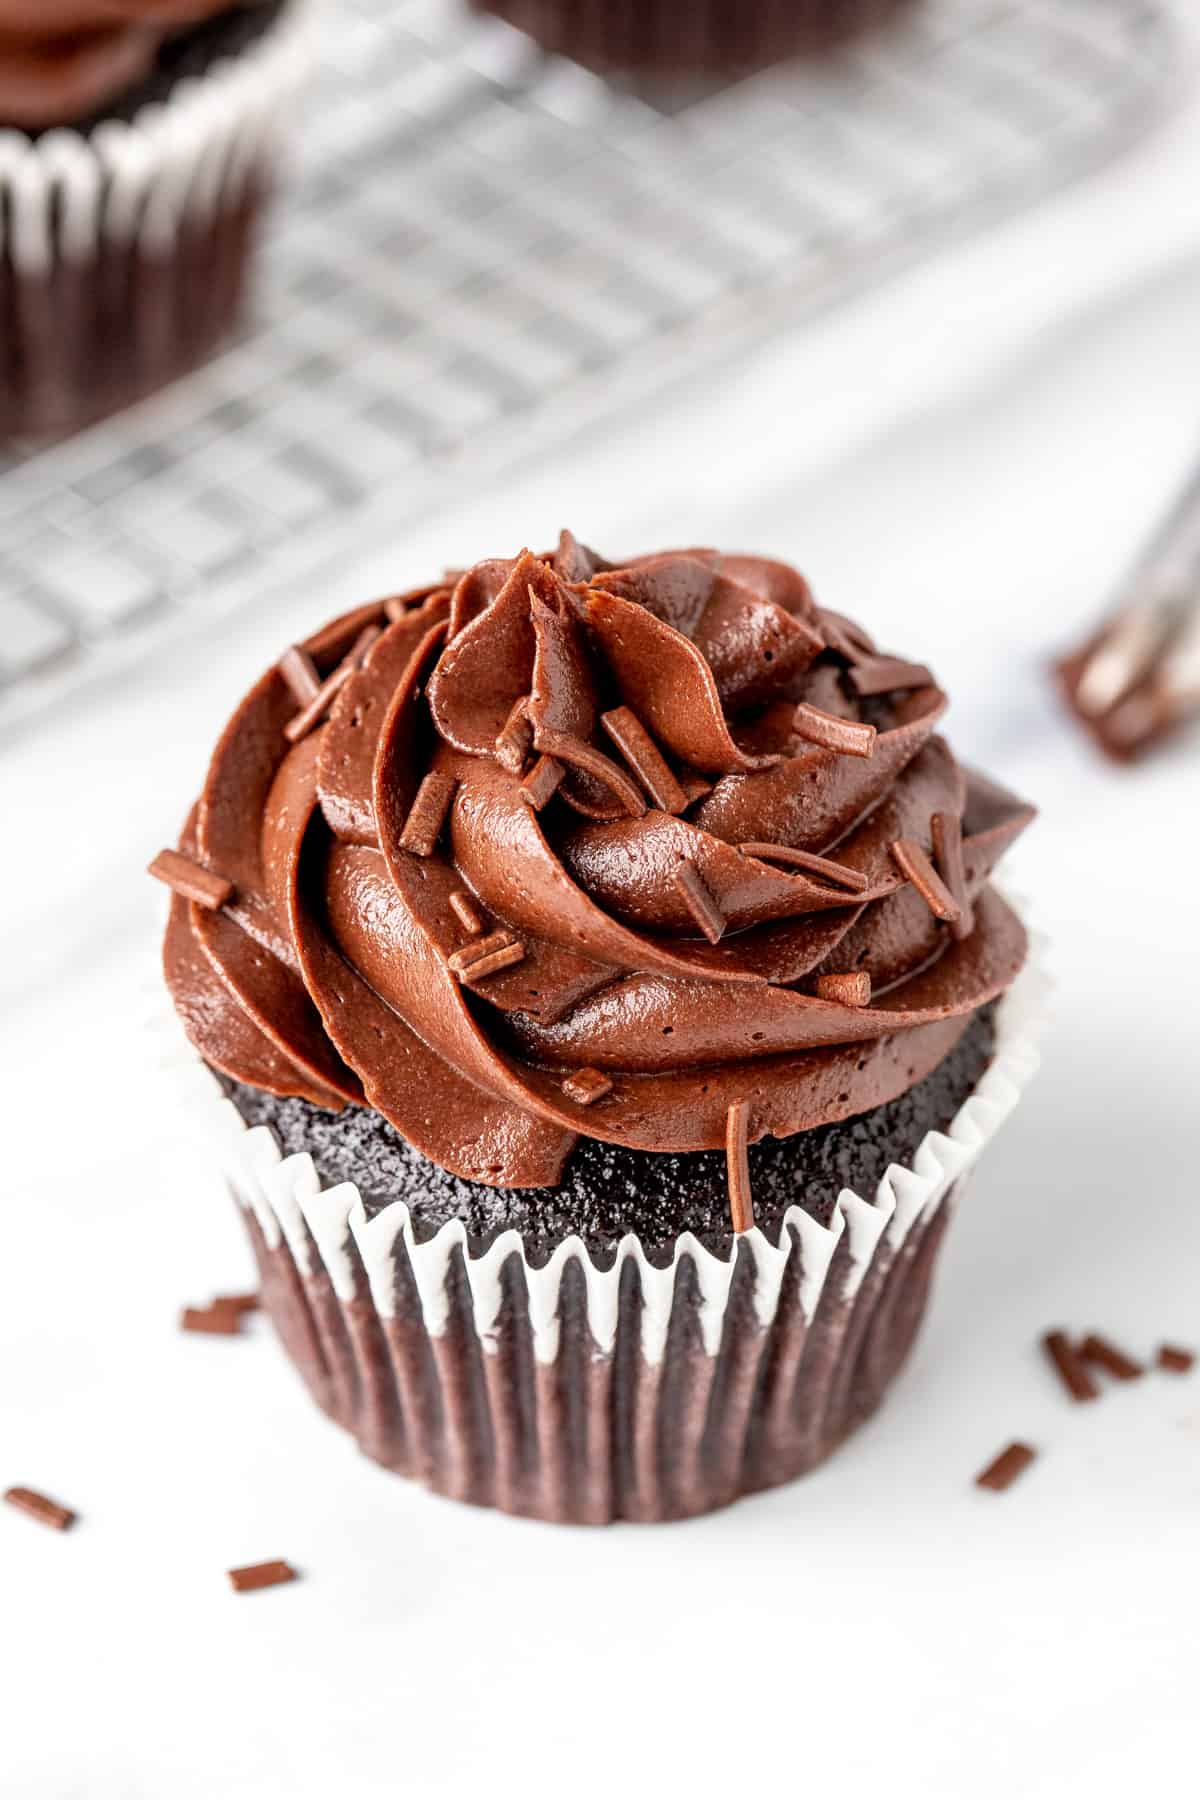 Chocolate cupcake decorated with chocolate buttercream frosting